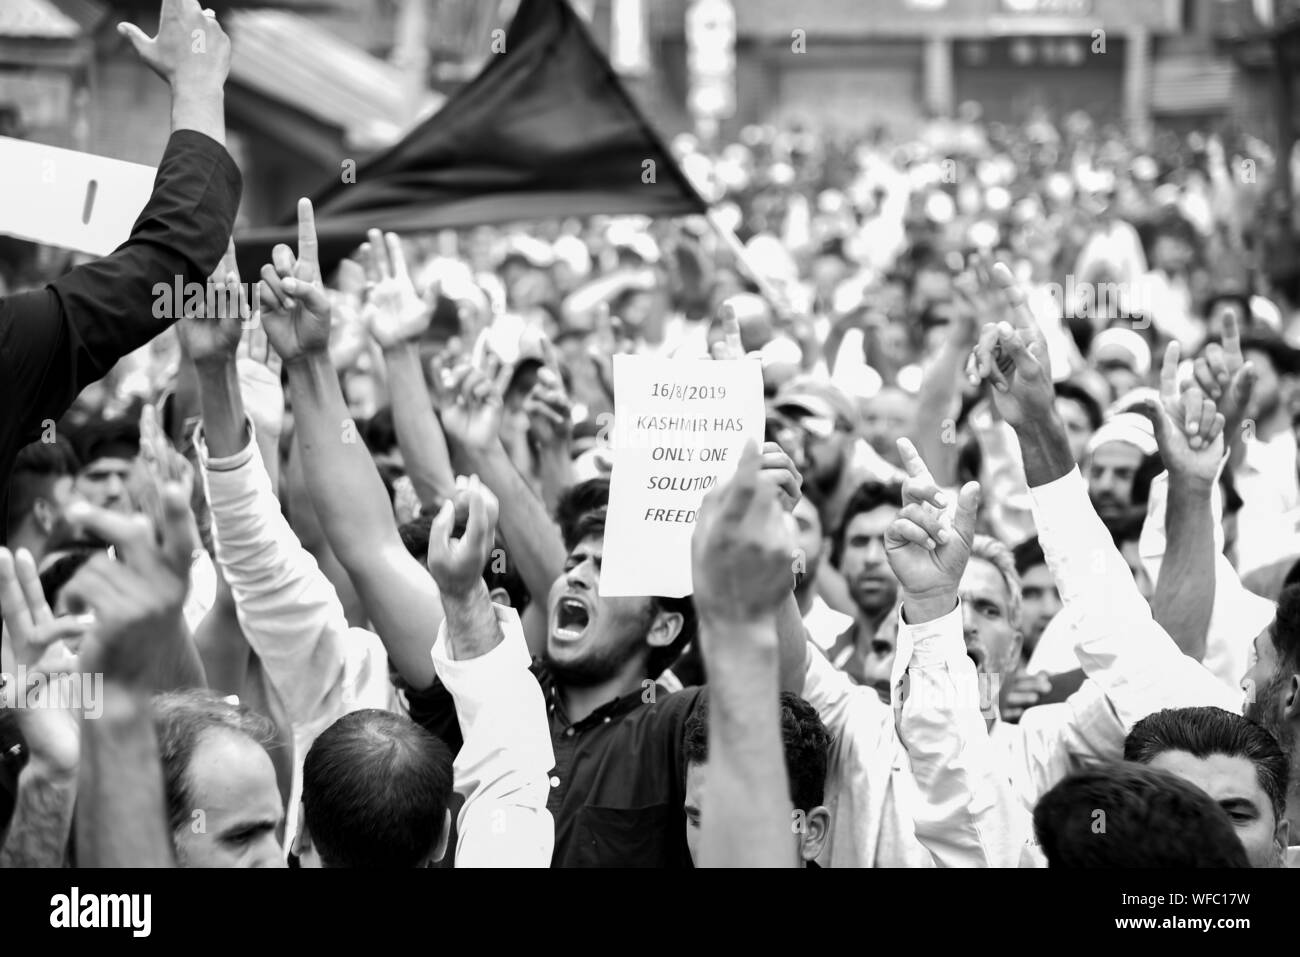 Srinagar, Jammu and Kashmir, India. 16th Aug, 2019. Kashmir protesters make gestures during the demonstration.Hundreds of people have held a street protest in Kashmir as India's government assured the Supreme Court that the situation in the disputed region is being reviewed daily and unprecedented security restrictions will be removed over the next few days. Credit: Idrees Abbas/SOPA Images/ZUMA Wire/Alamy Live News Stock Photo